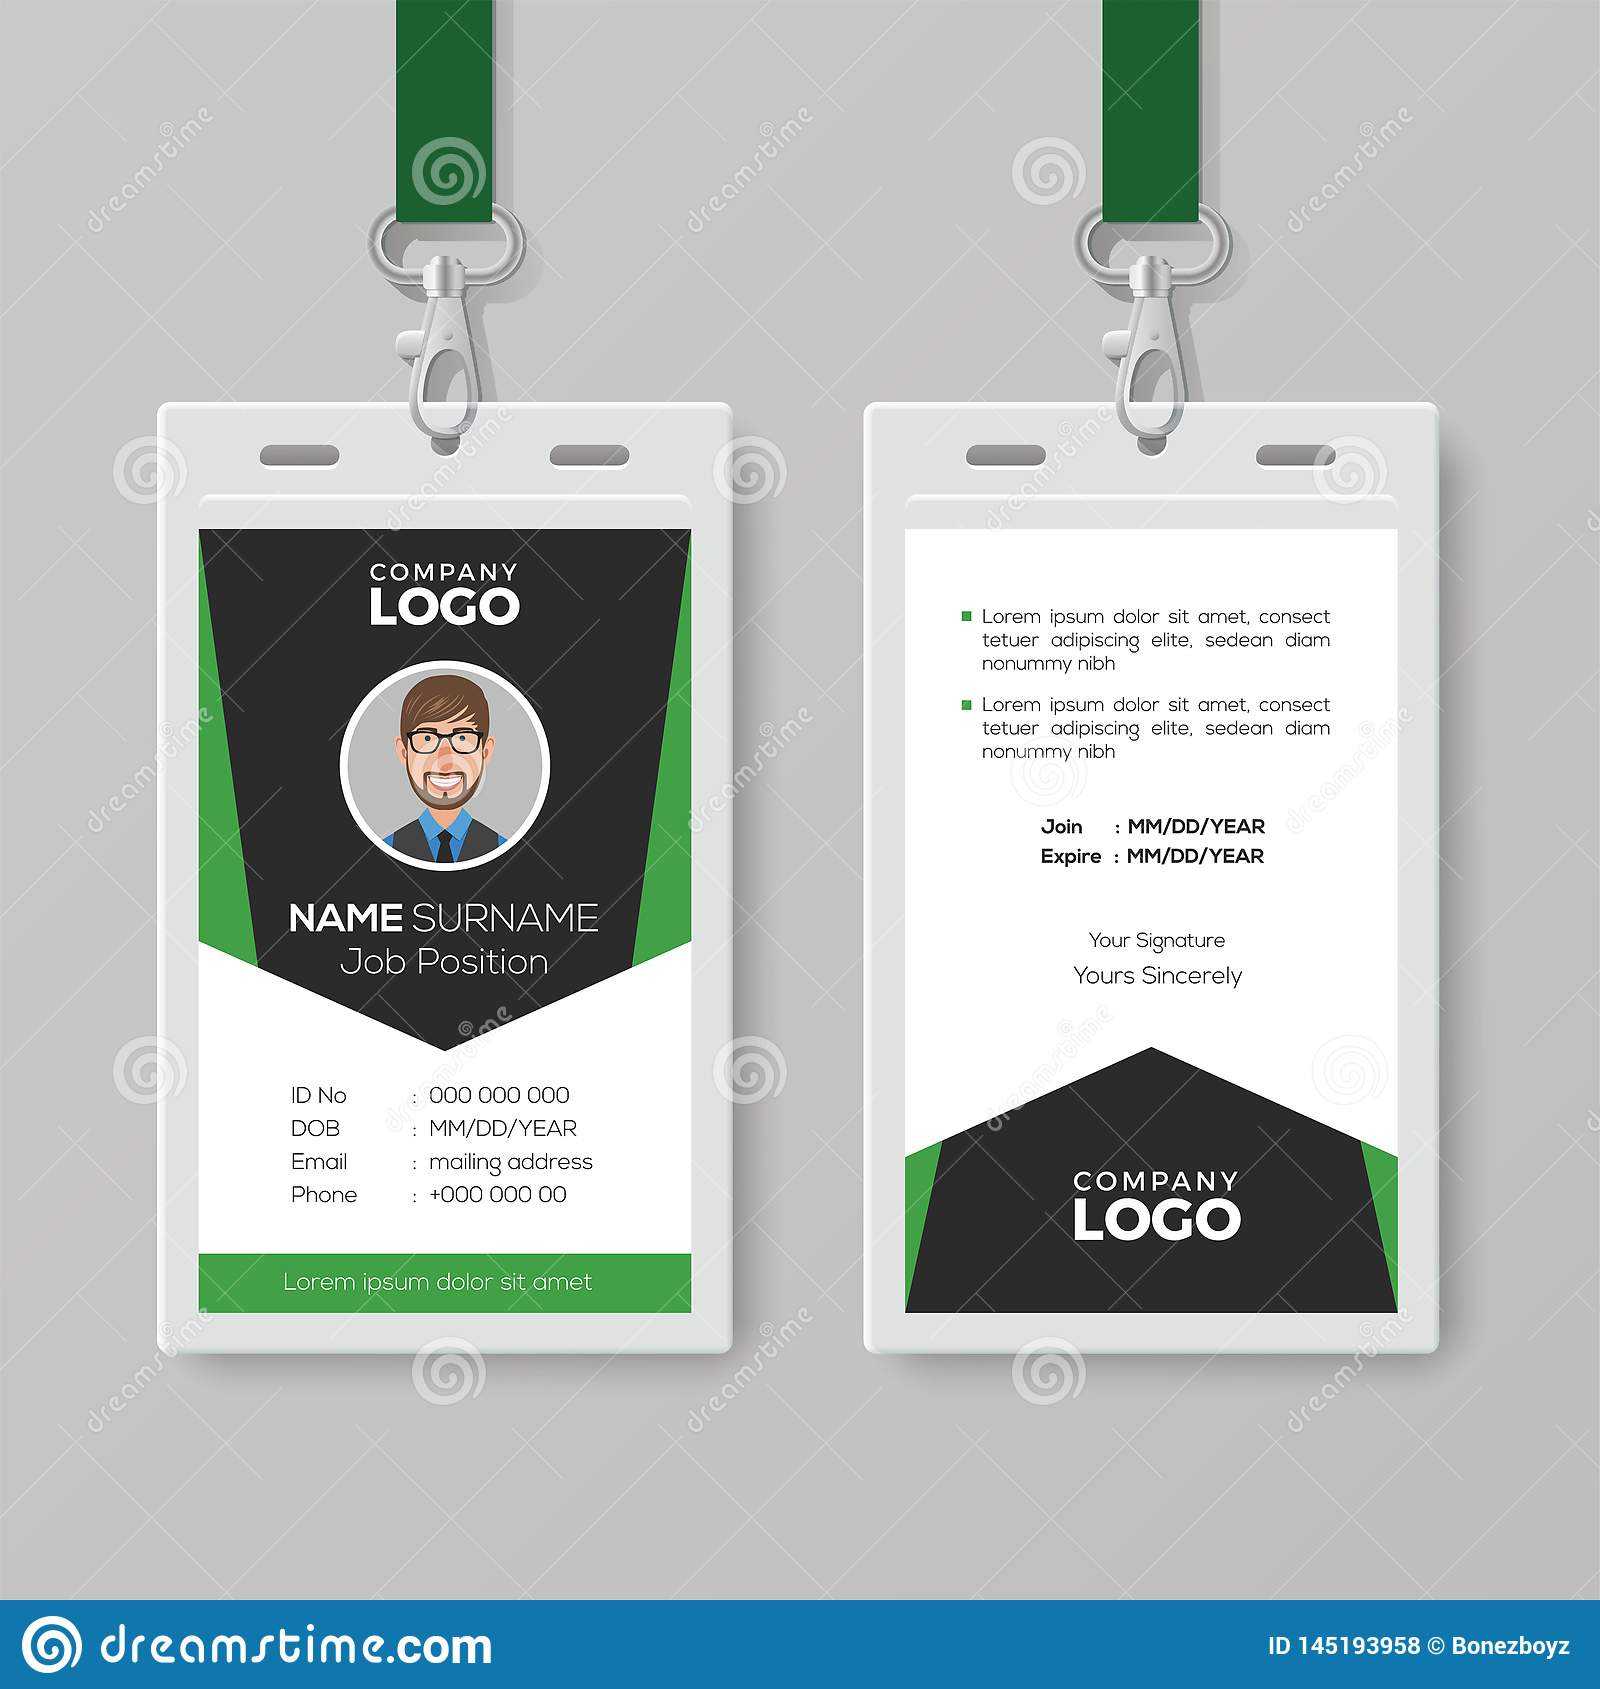 Creative Corporate Id Card Template With Green Details Stock Regarding Work Id Card Template